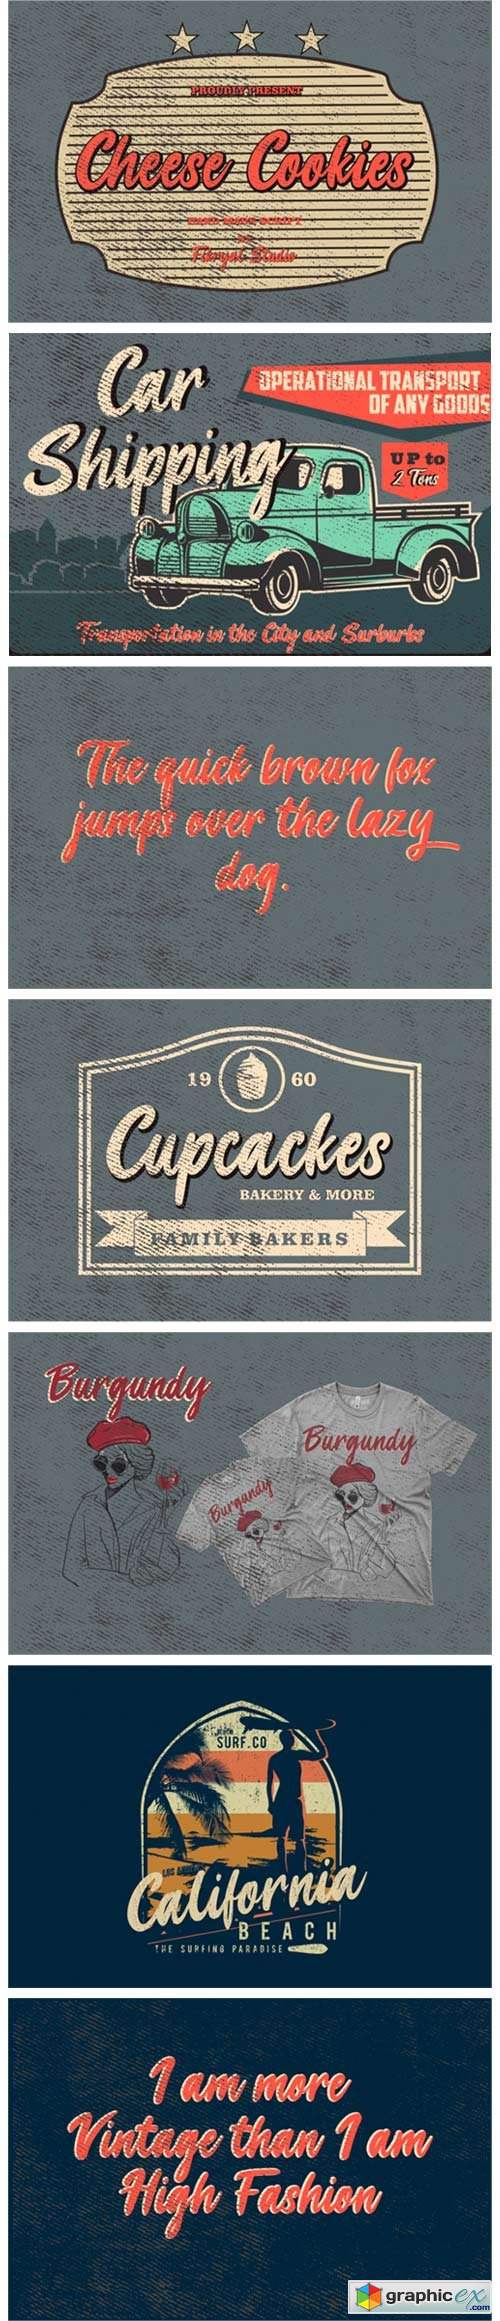  Cheese Cookies Font 